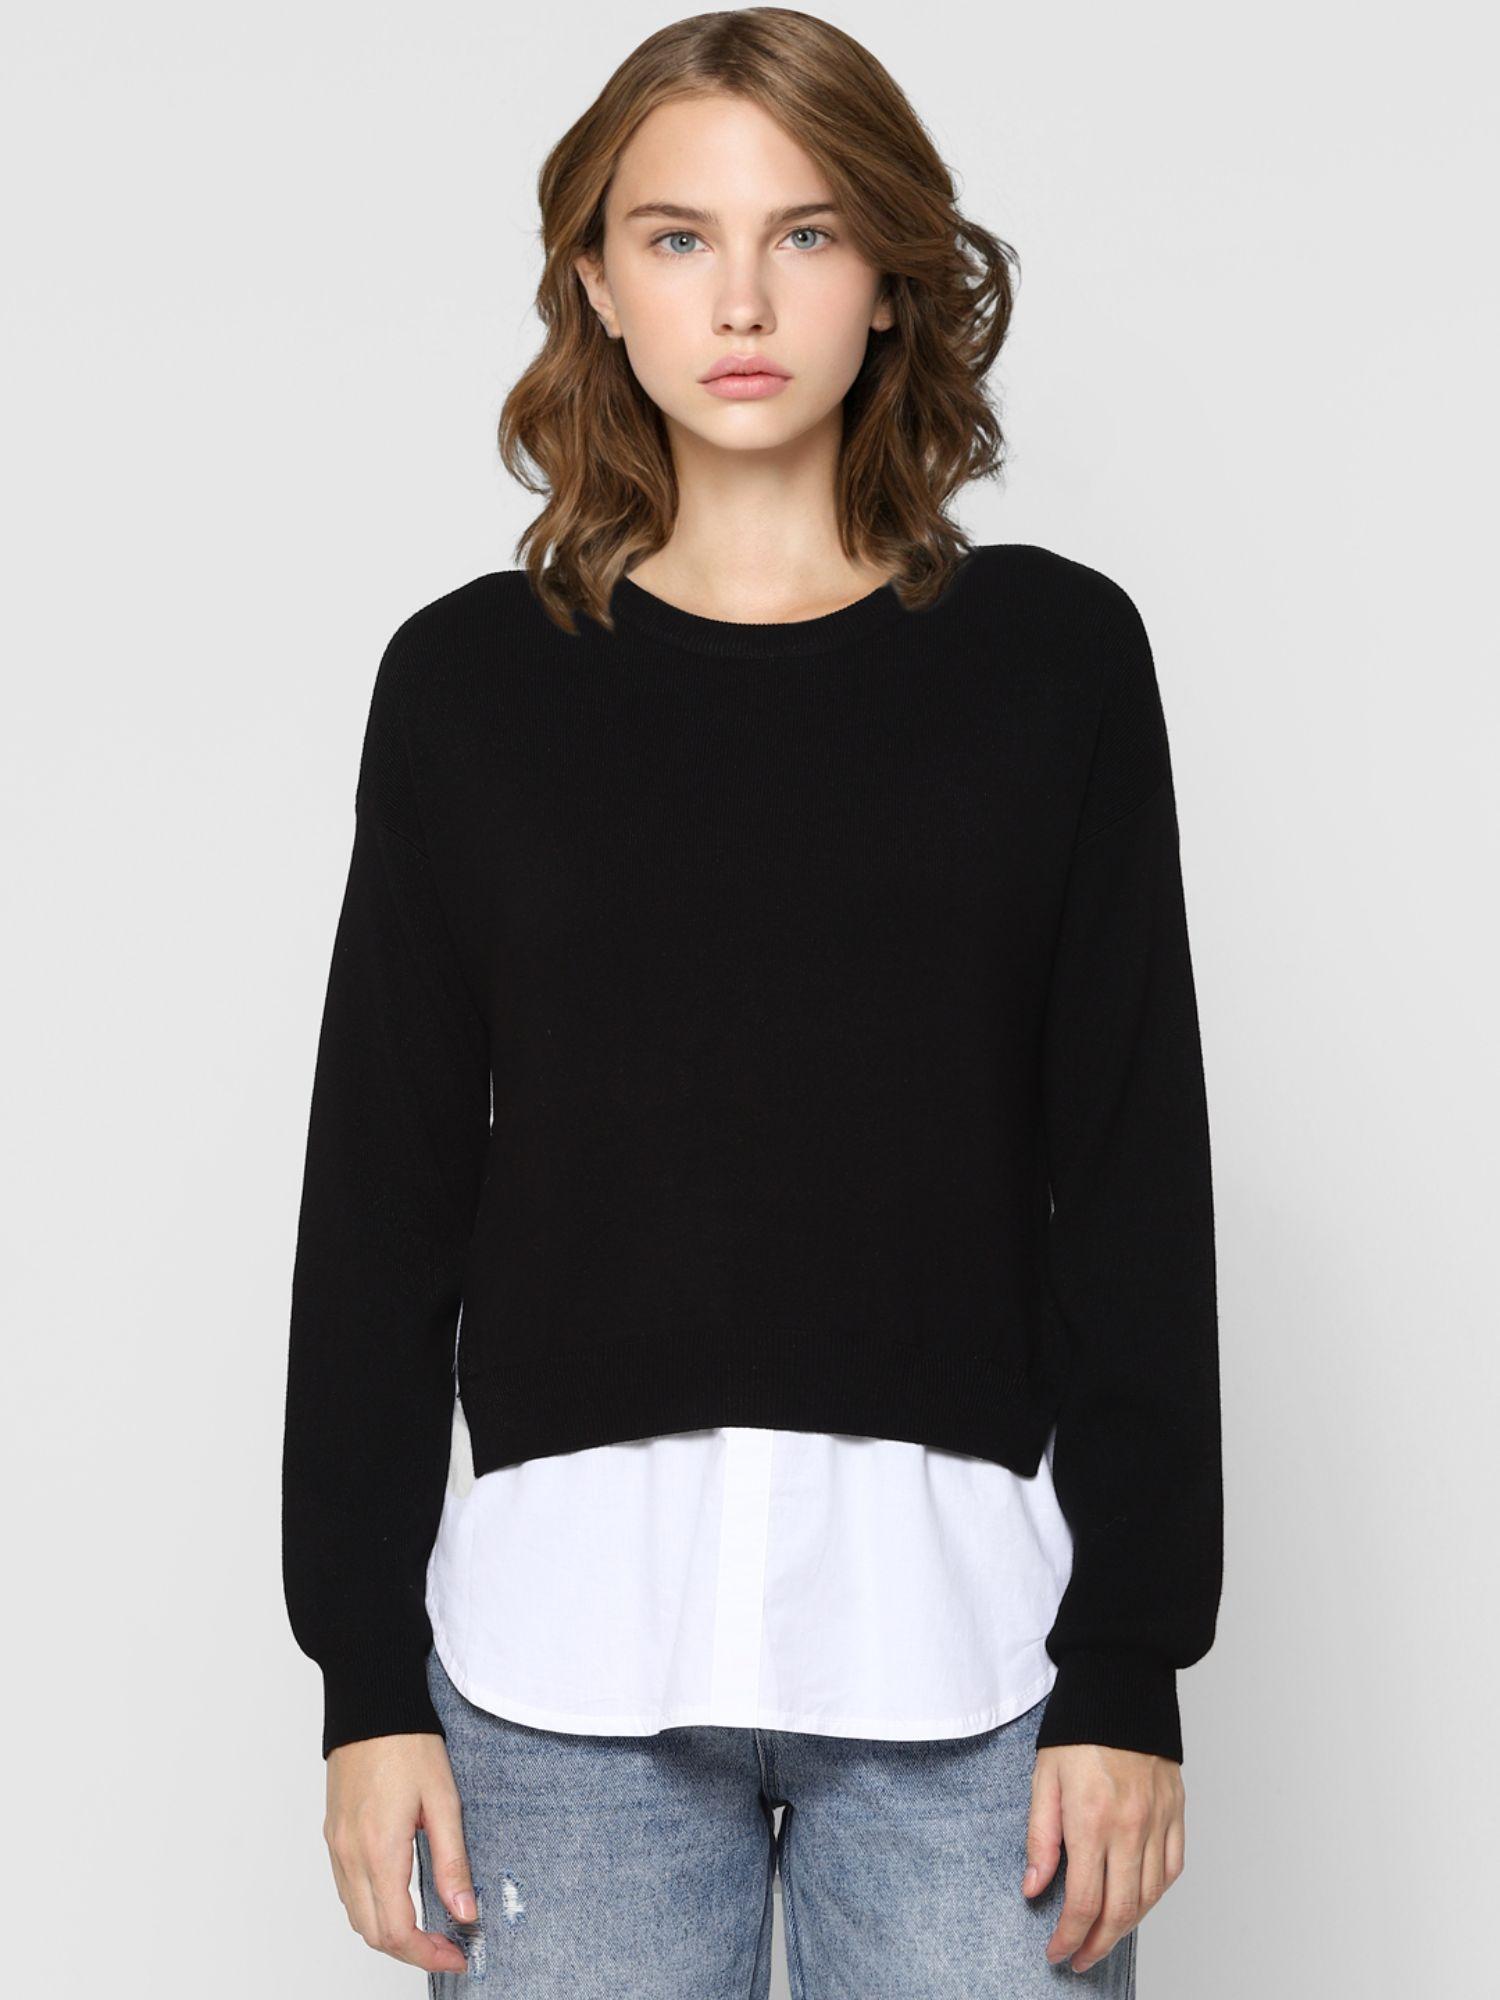 black-solid-knits